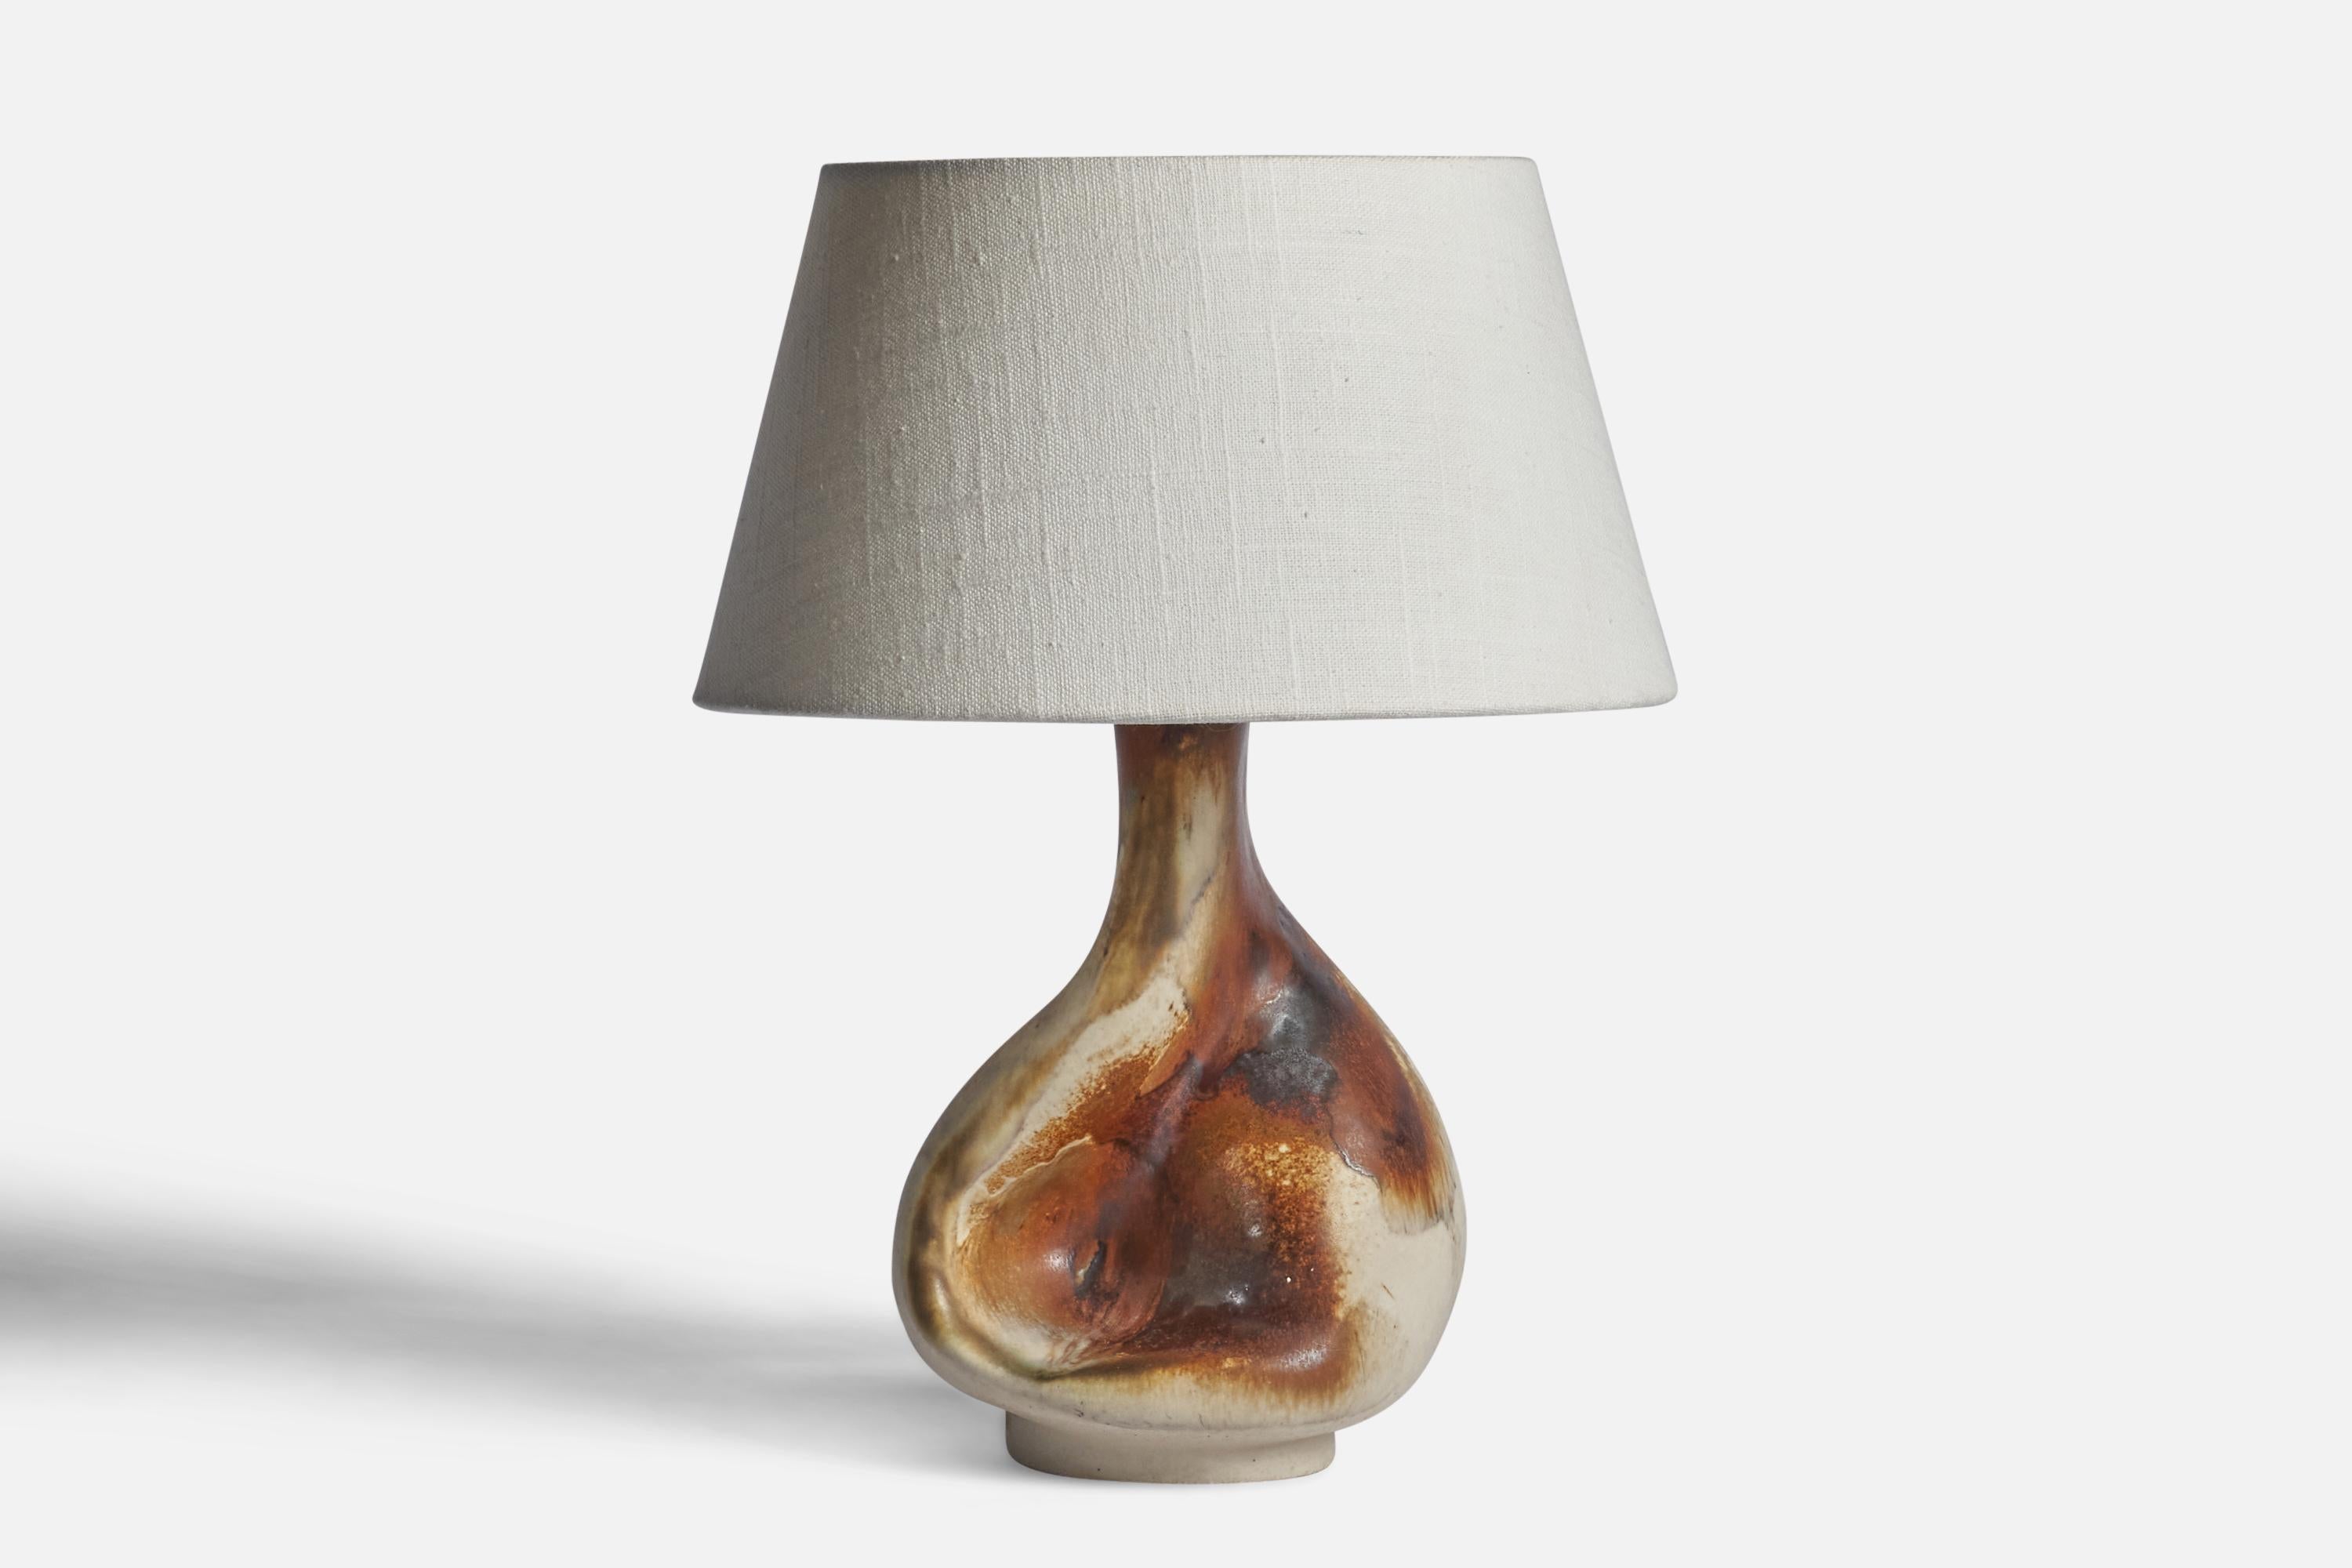 A brown and beige-glazed stoneware table lamp designed by Jette Hellerøe and produced by Axella, Denmark, c. 1960s.

Dimensions of Lamp (inches): 10.35” H x 5.75” Diameter
Dimensions of Shade (inches): 7” Top Diameter x 10” Bottom Diameter x